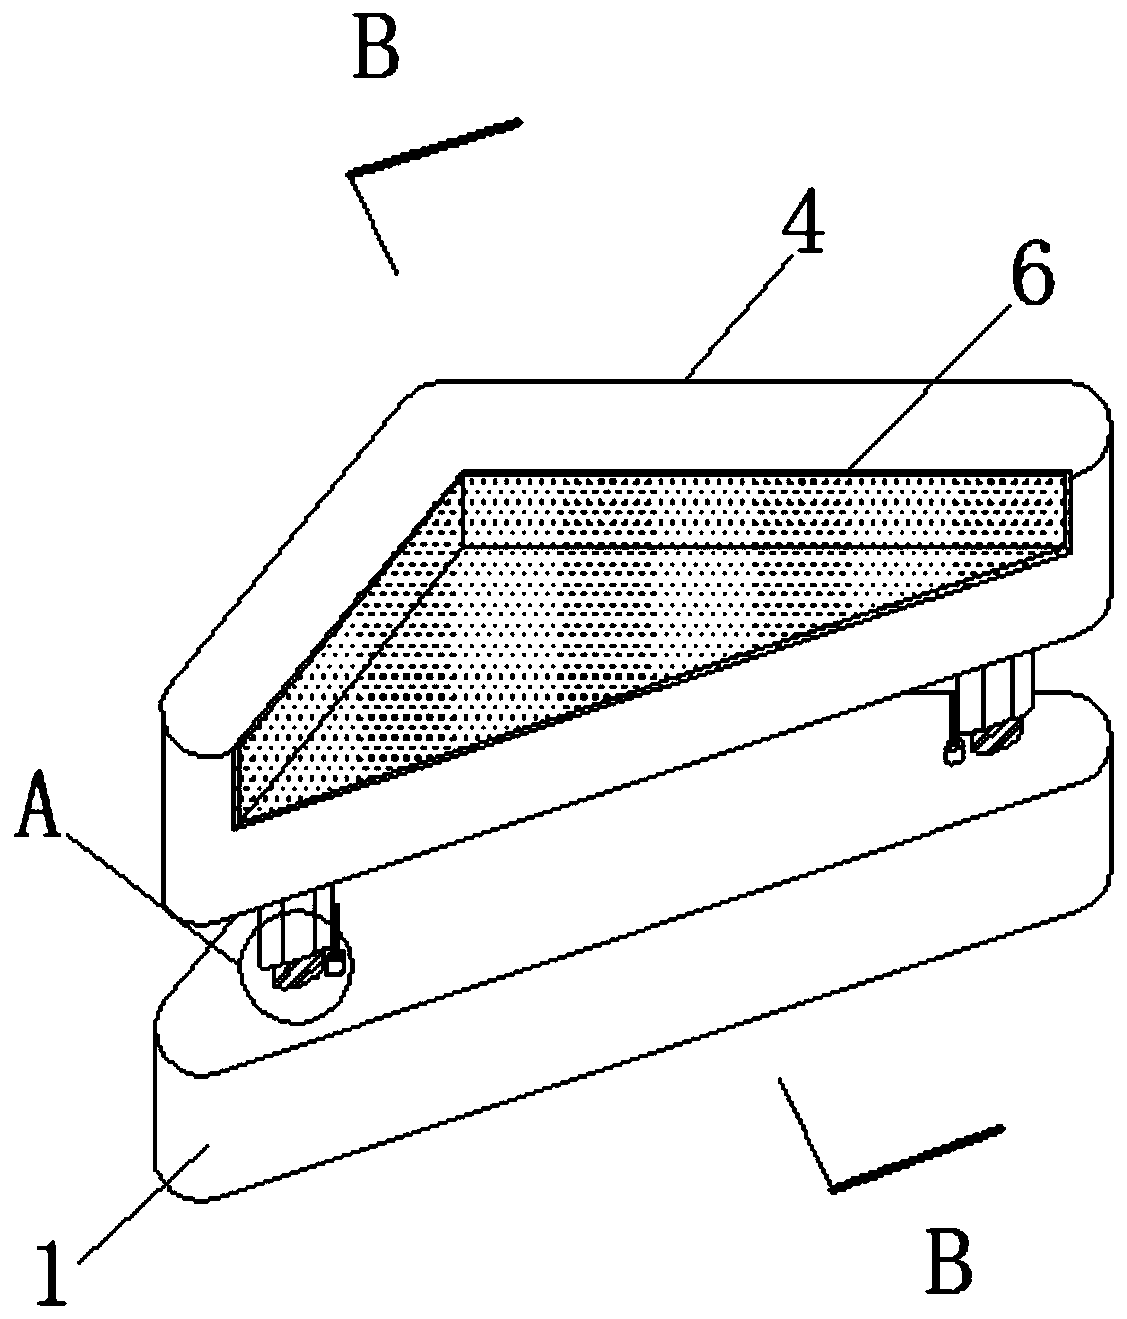 Corner protection device for large furniture supporting part based on gravity center principle